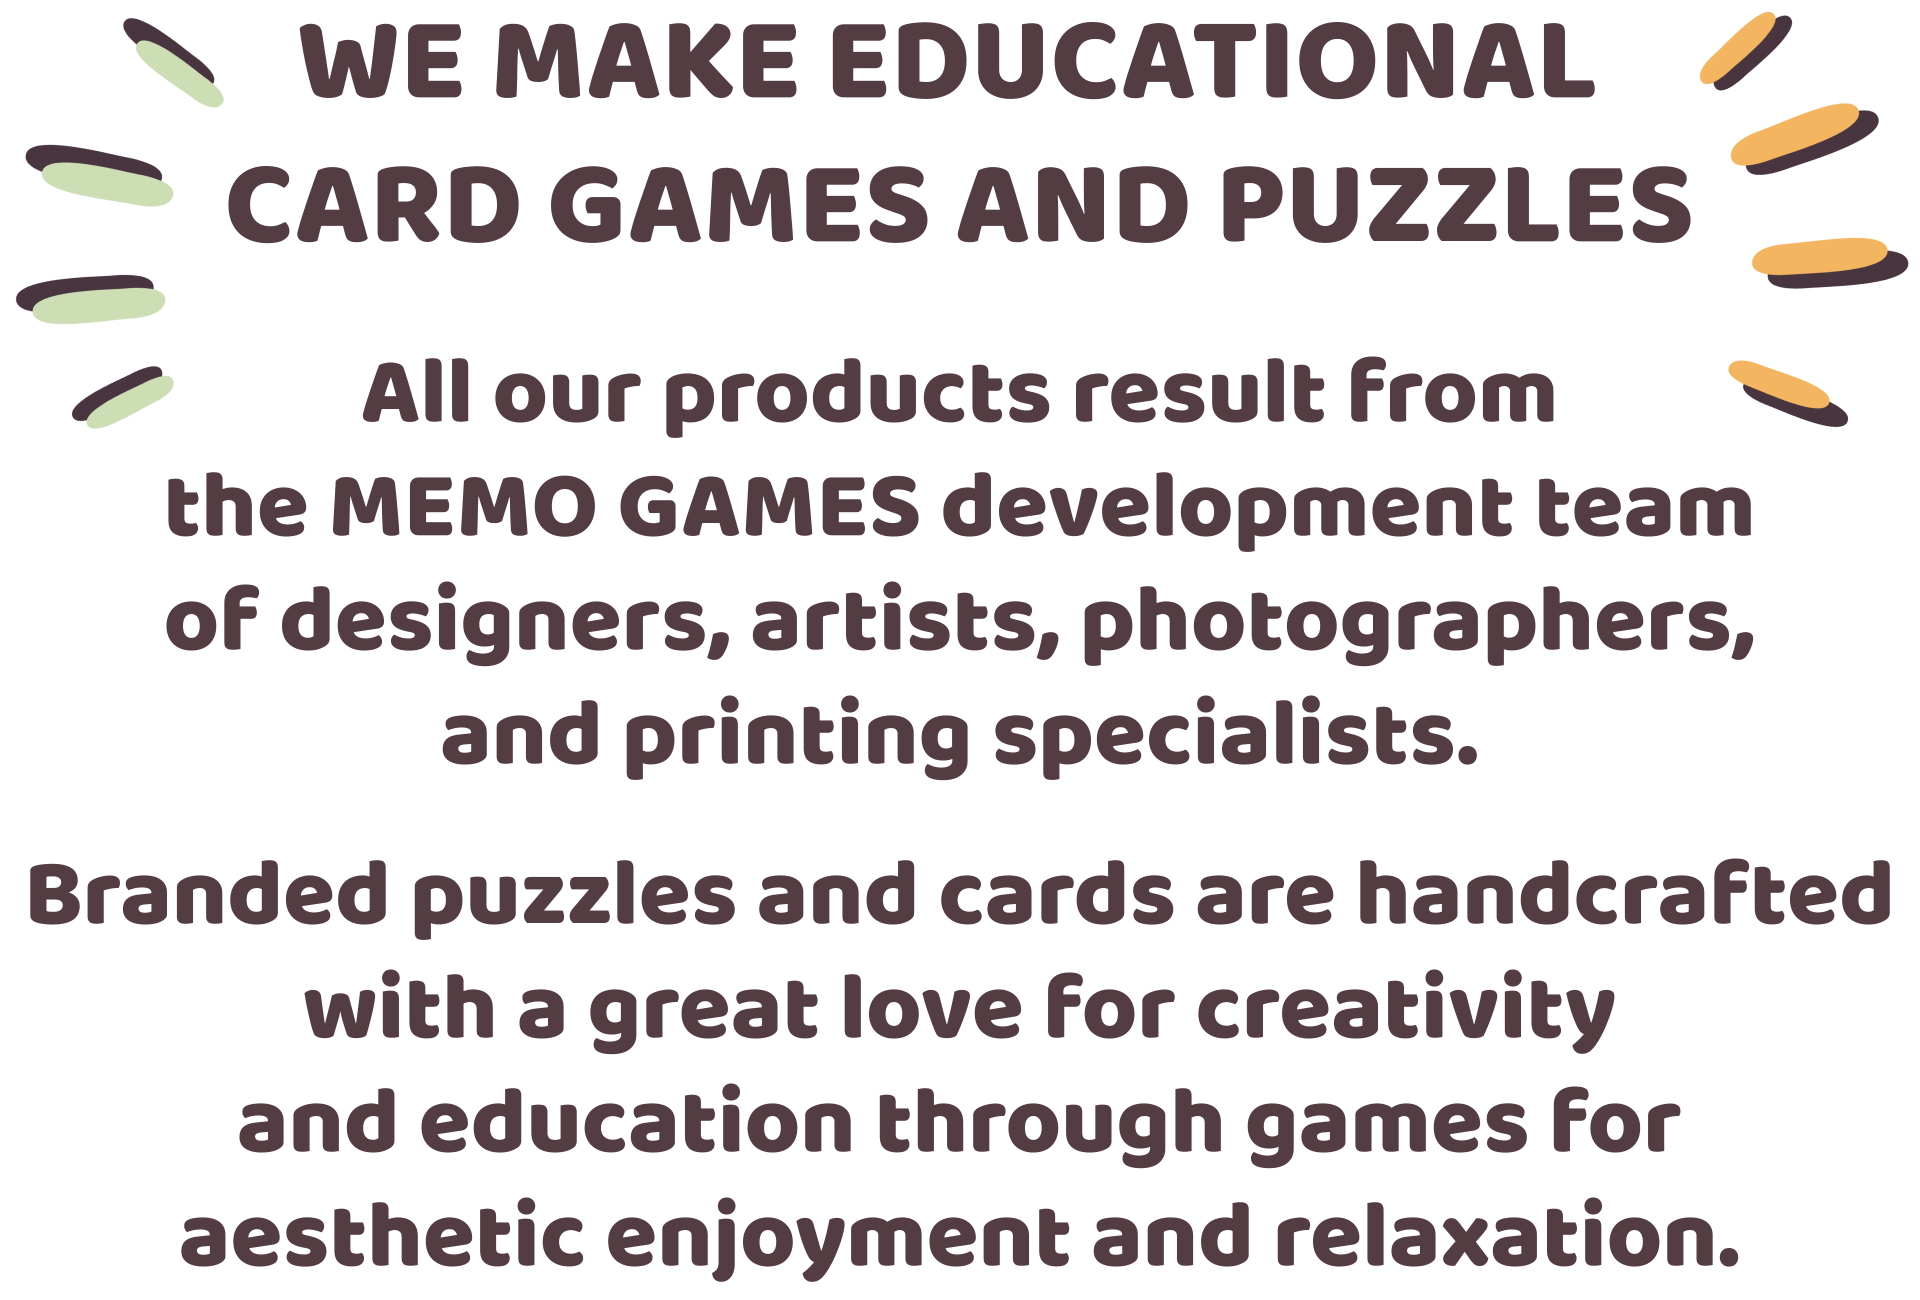 We make educational card games and puzzles. All our products result from the MEMO GAMES development team of designers, artists, photographers, and printing specialists. Branded puzzles and cards are handcrafted with a great love for creativity and education through games for aesthetic enjoyment and relaxation.